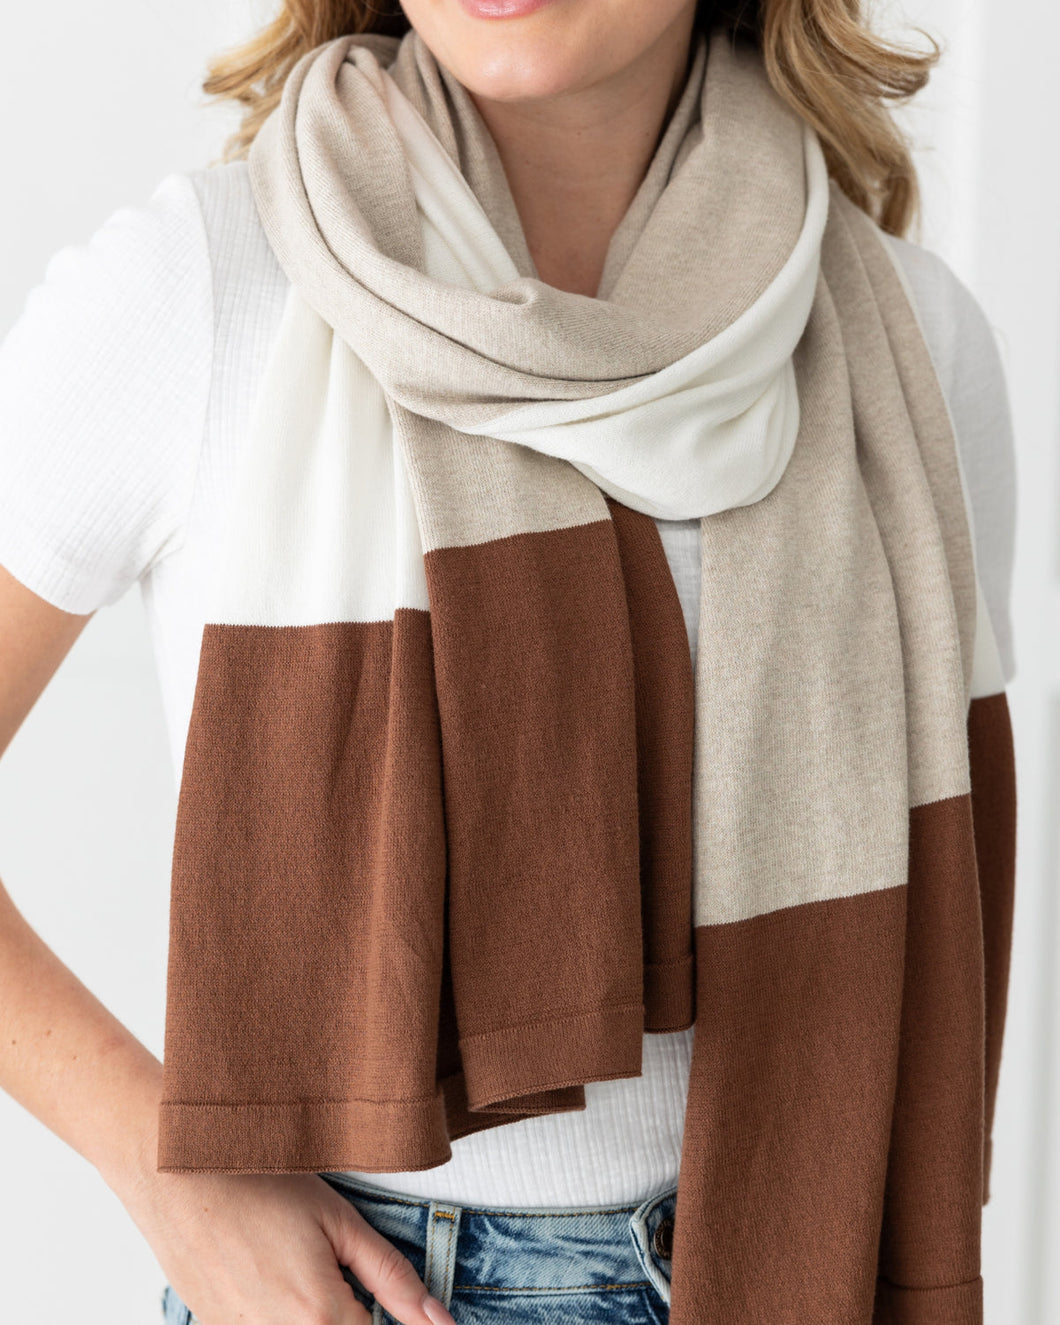 Dreamsoft Organic Cotton Travel Scarf - Canyon Brown Colorblock